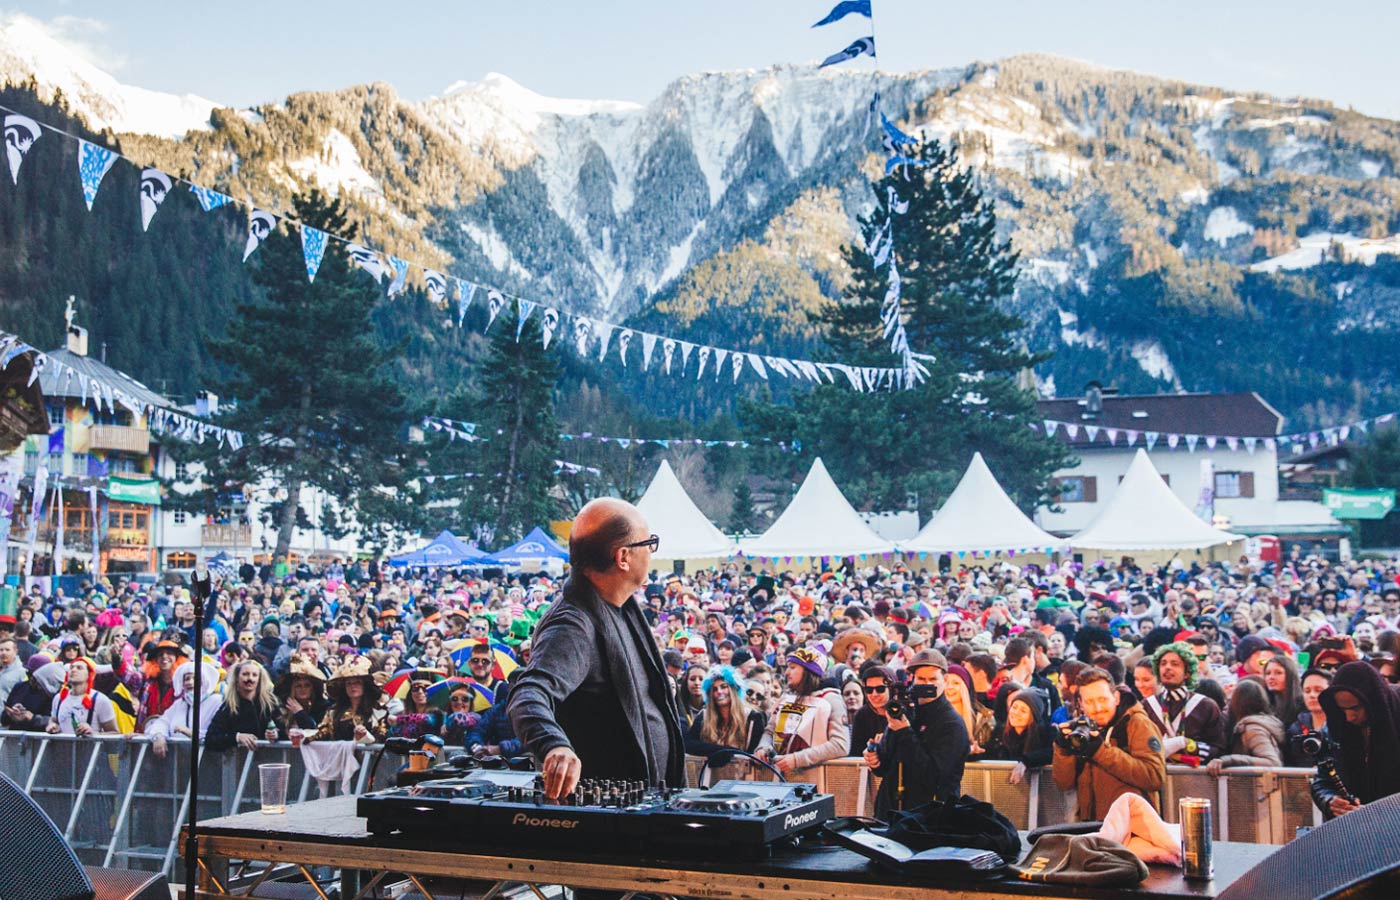 Snowbombing view from the stage